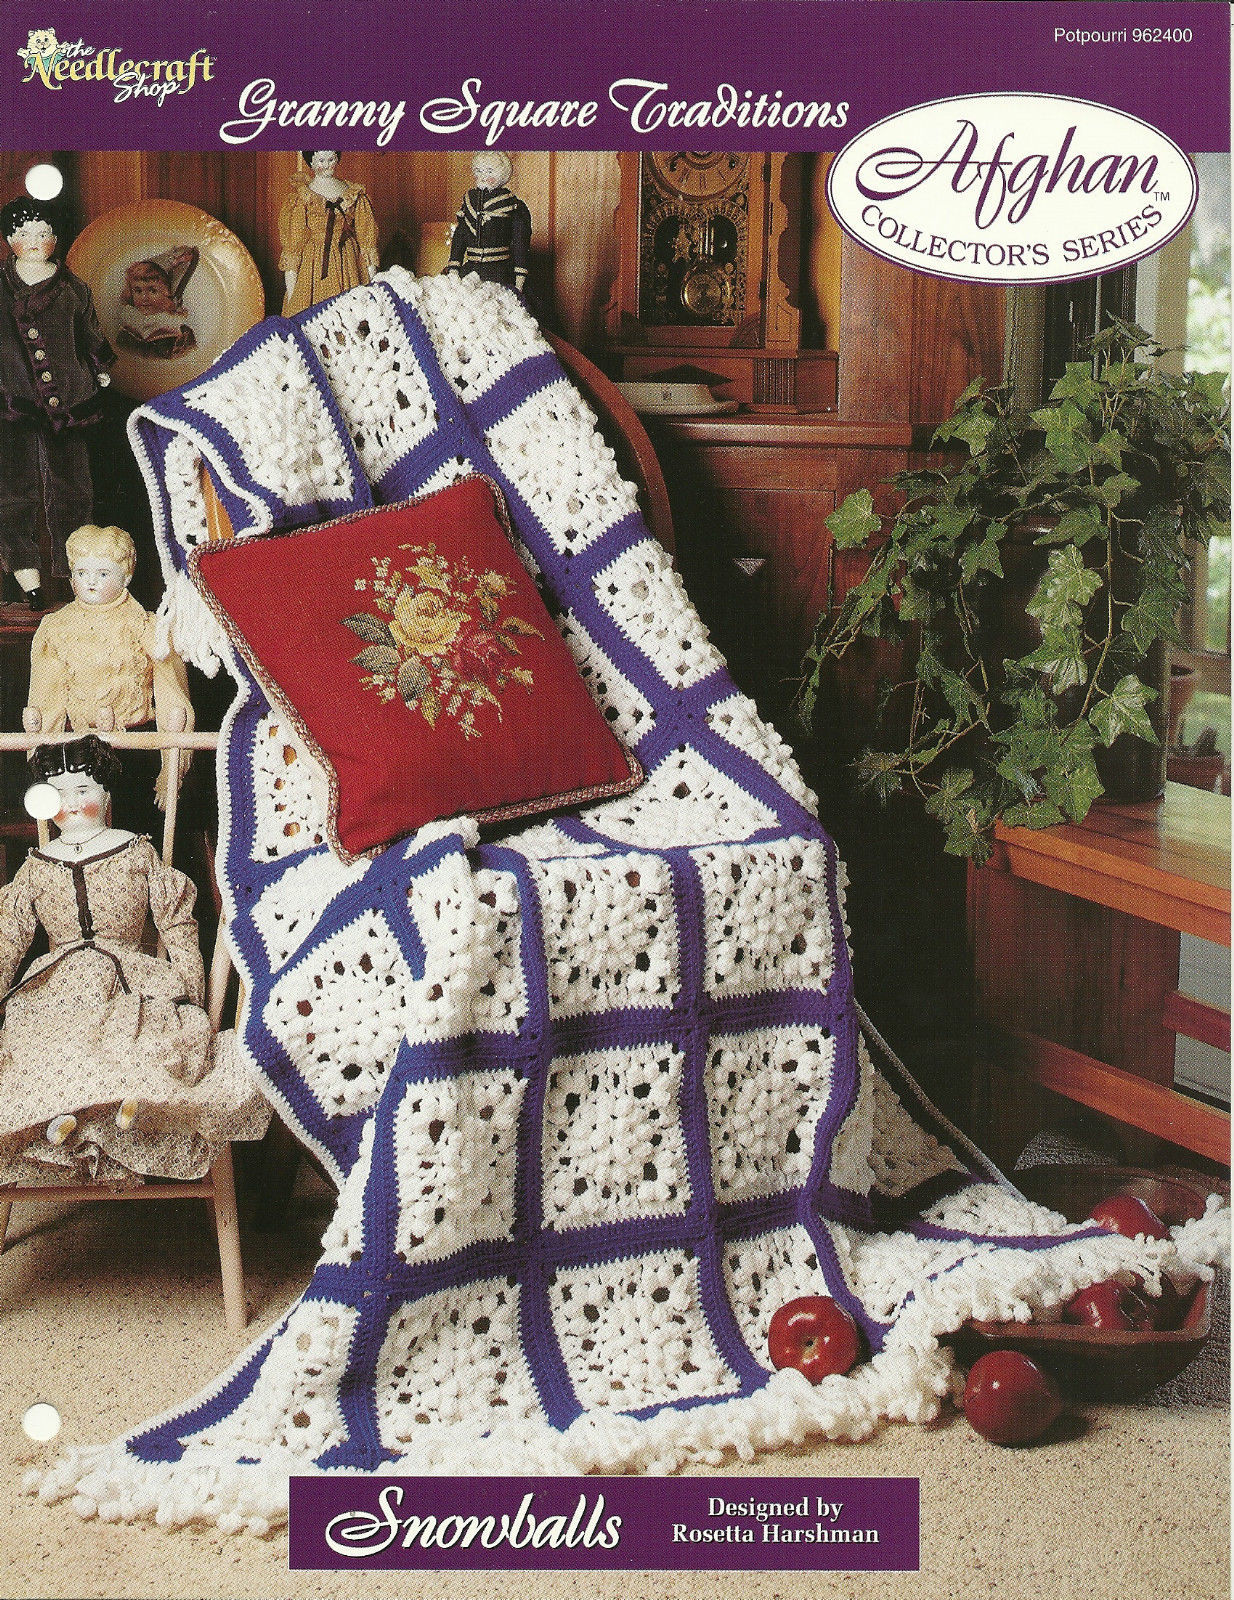 Primary image for Needlecraft Shop Crochet Pattern 962400 Snowballs Afghan Collectors Series